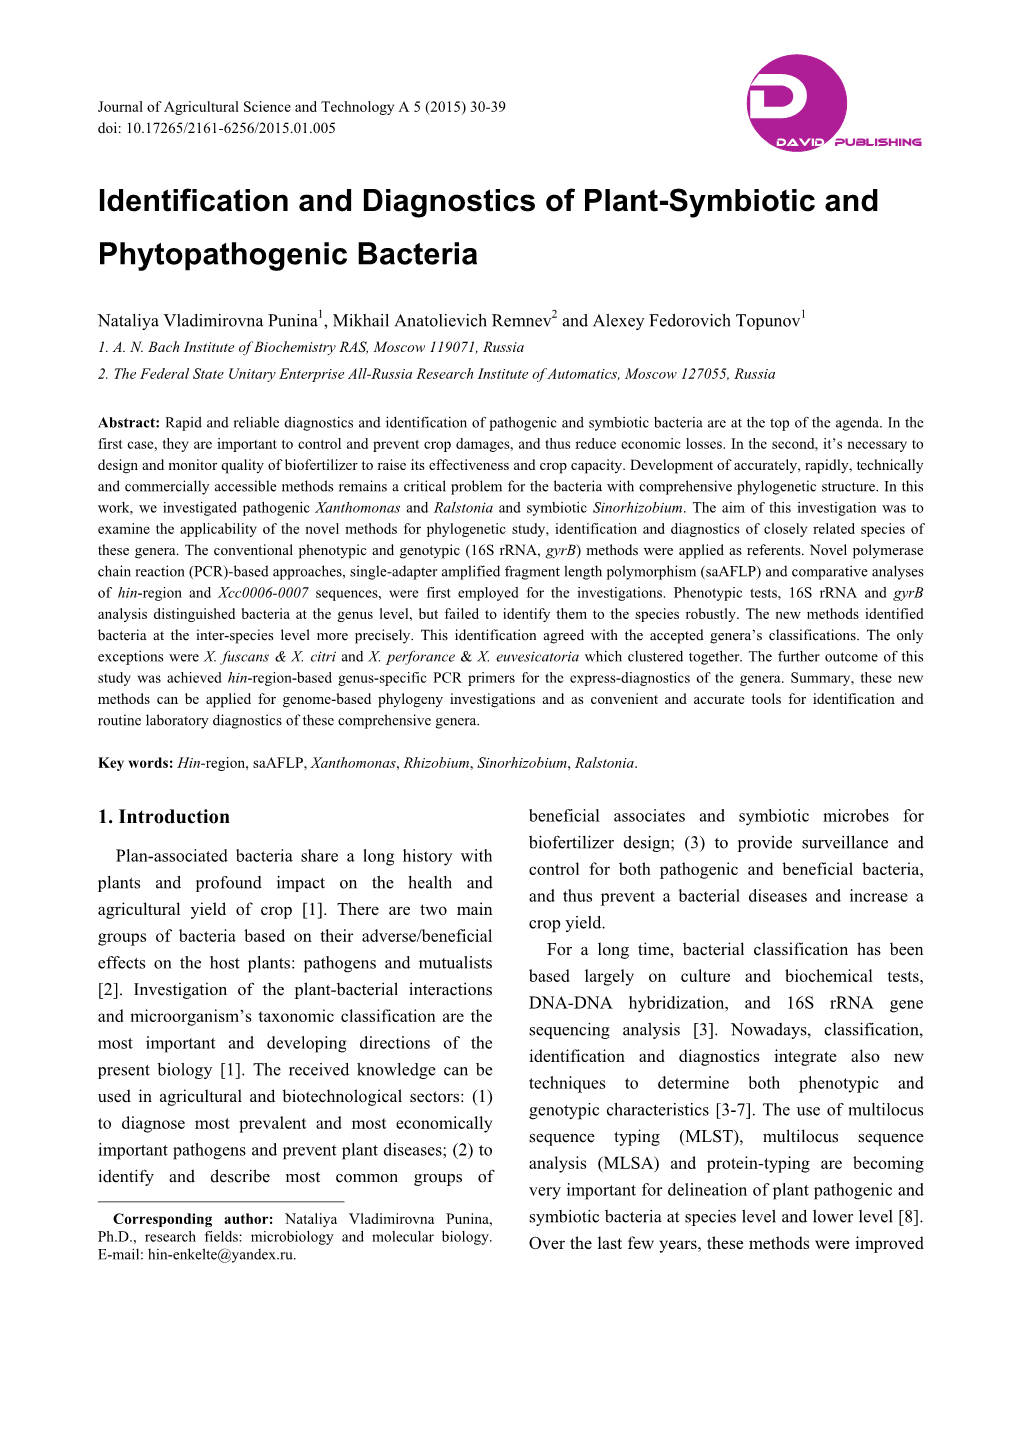 Identification and Diagnostics of Plant-Symbiotic and Phytopathogenic Bacteria